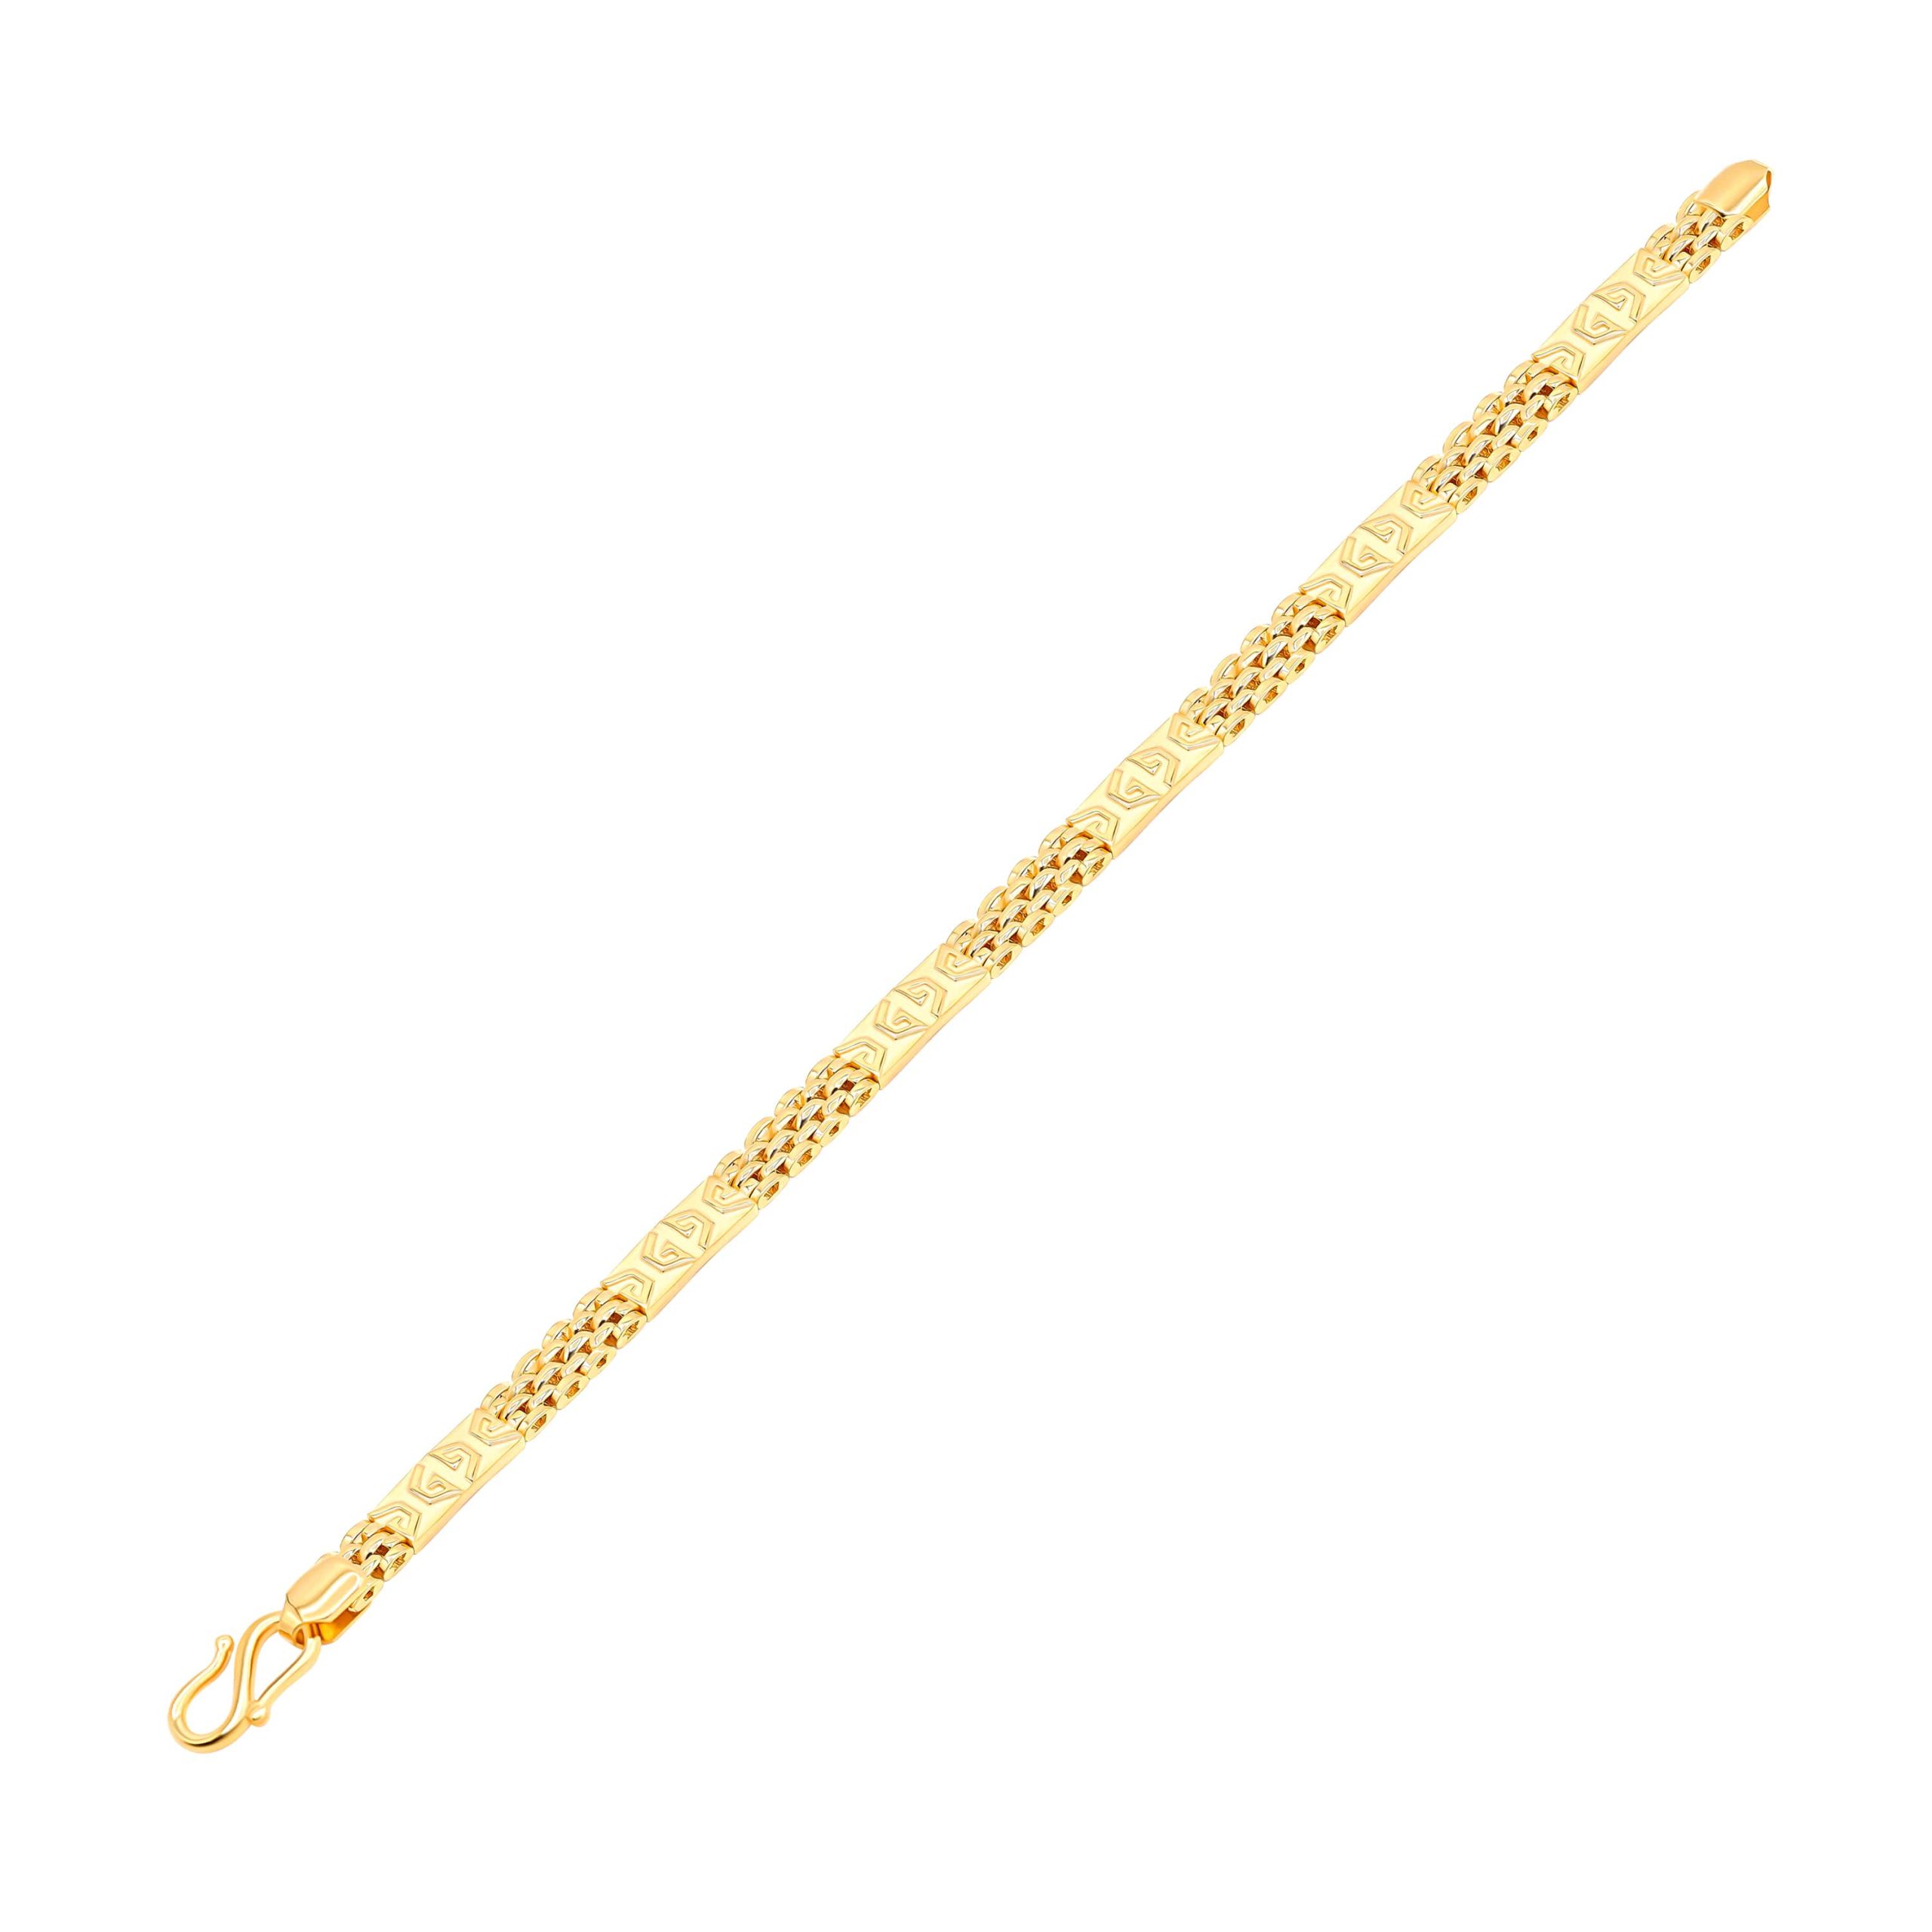 Buy One Gram Gold Guarantee Daily Use Chain Type Hand Bracelet Design Online-sonthuy.vn